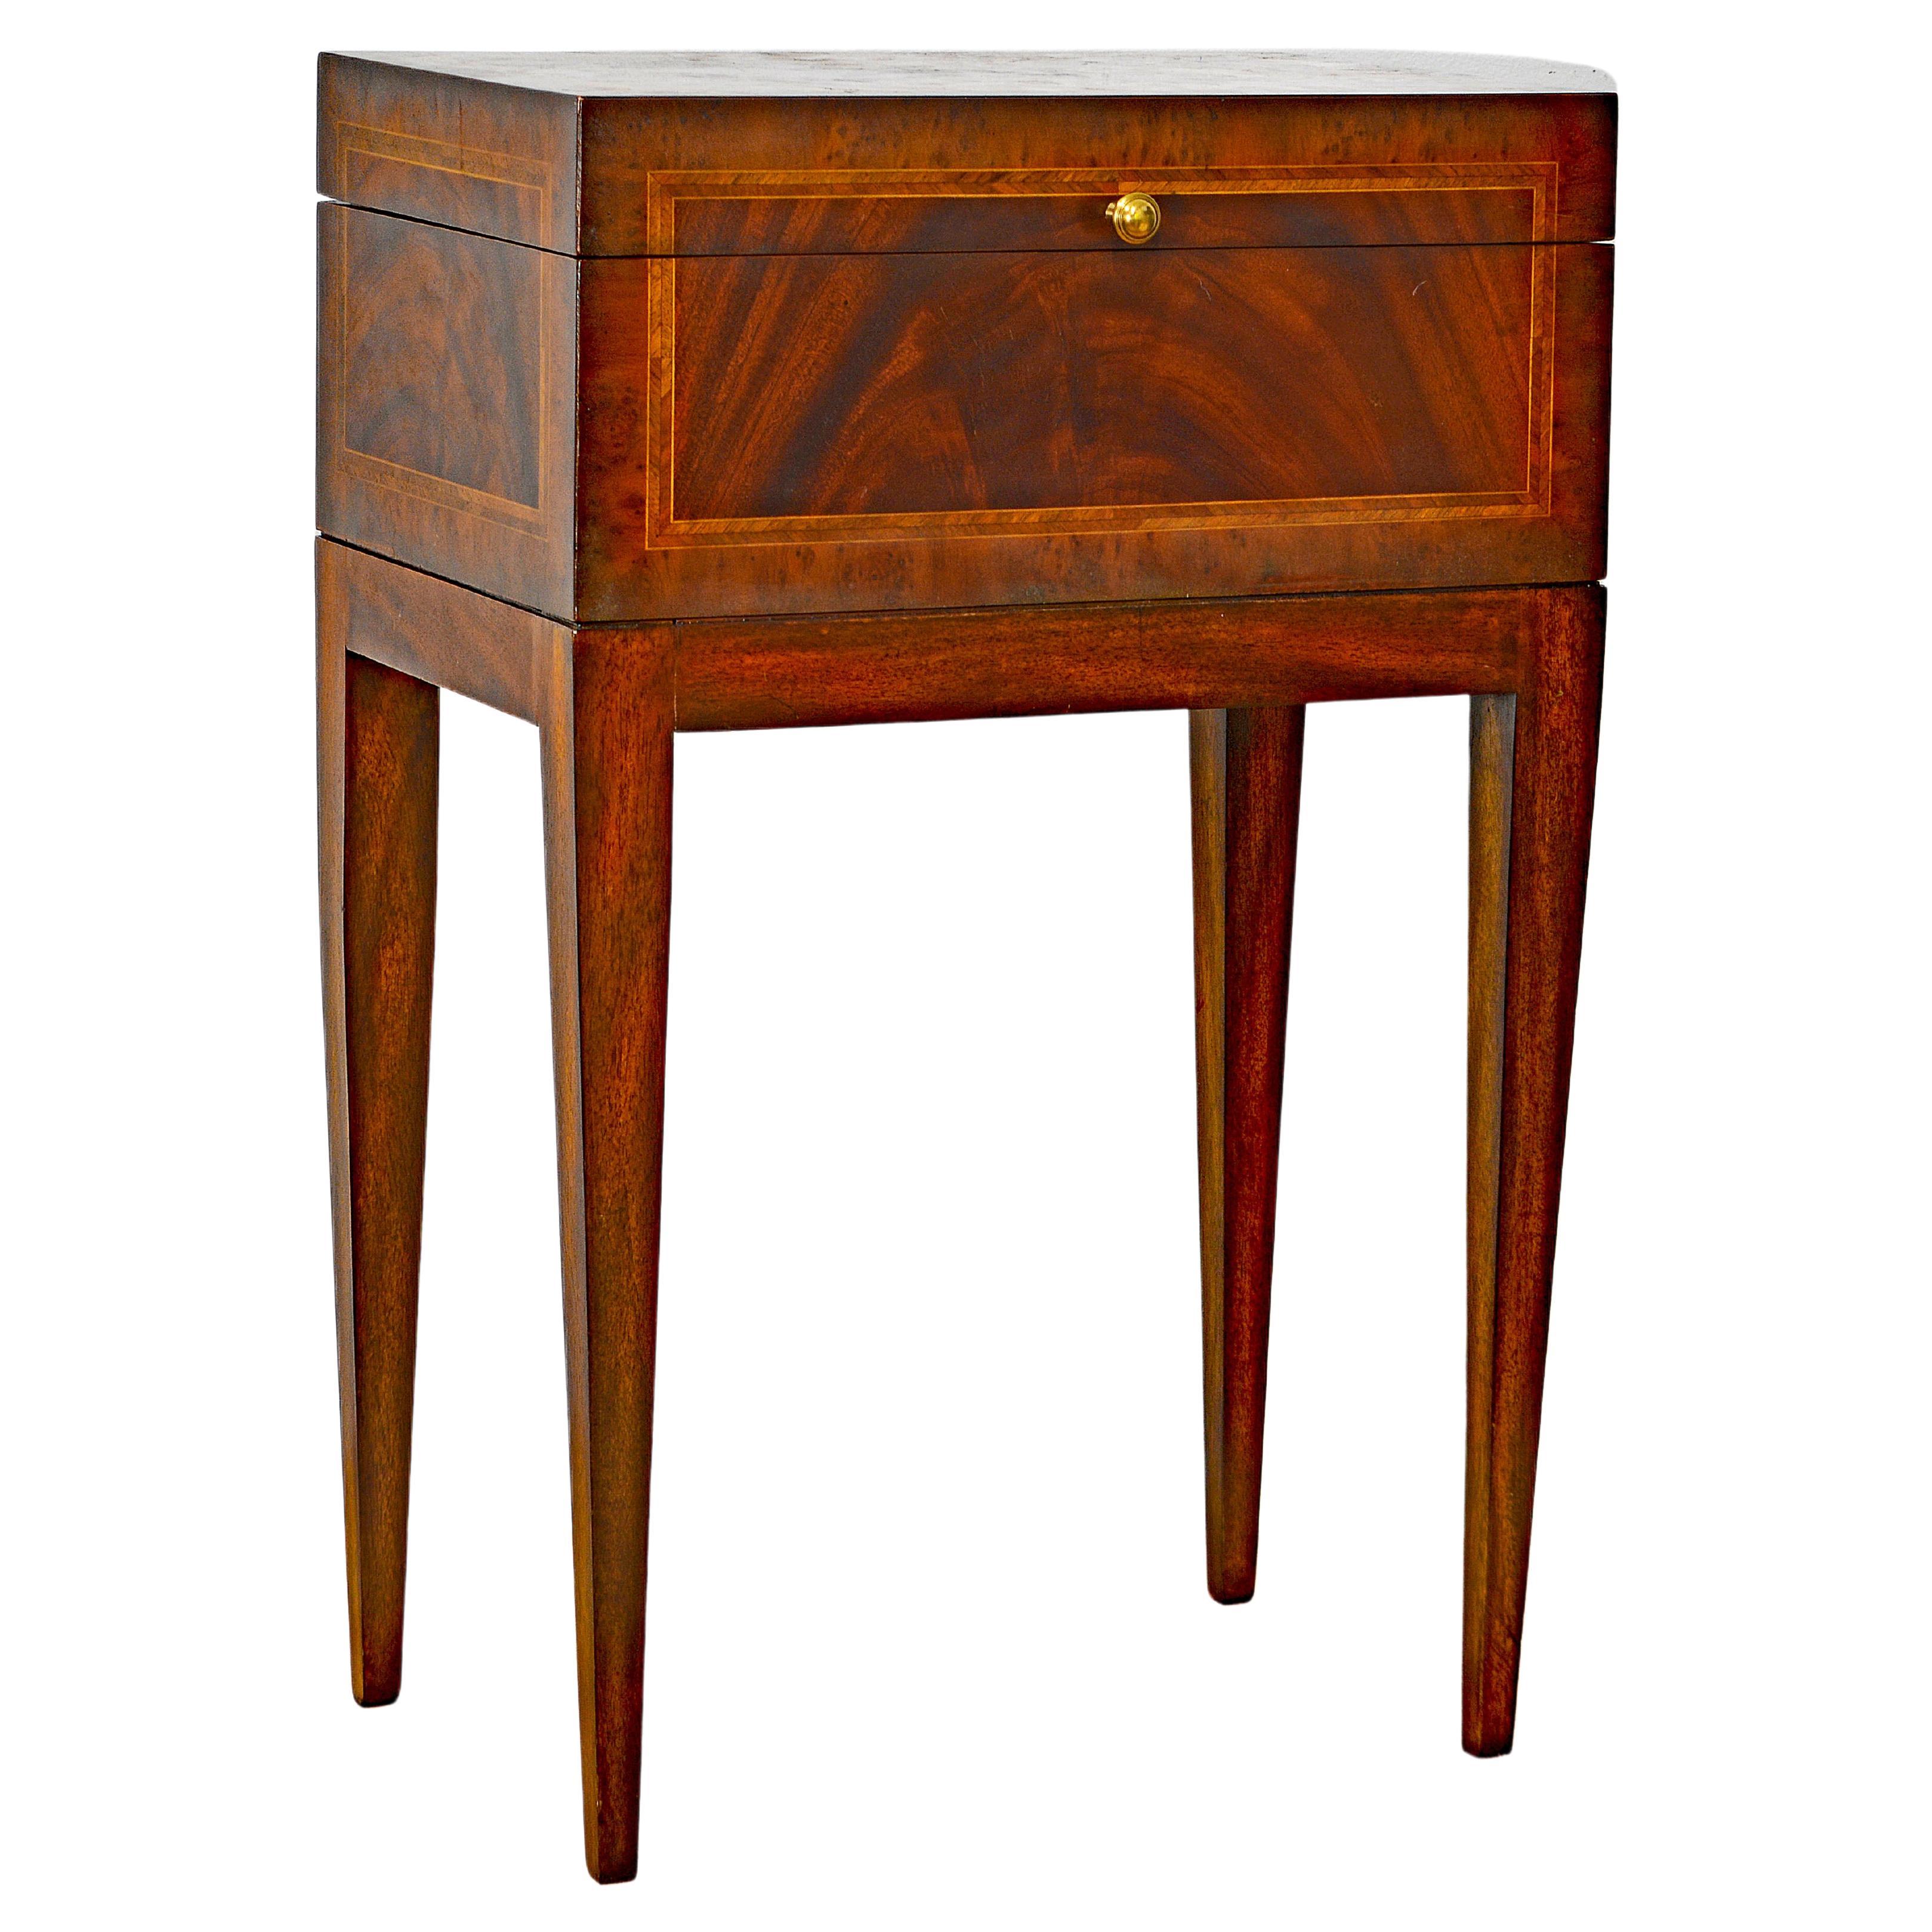 Elegant Georgian Style Maitland Smith Inlaid Mahogany Accent Storage Side Table For Sale